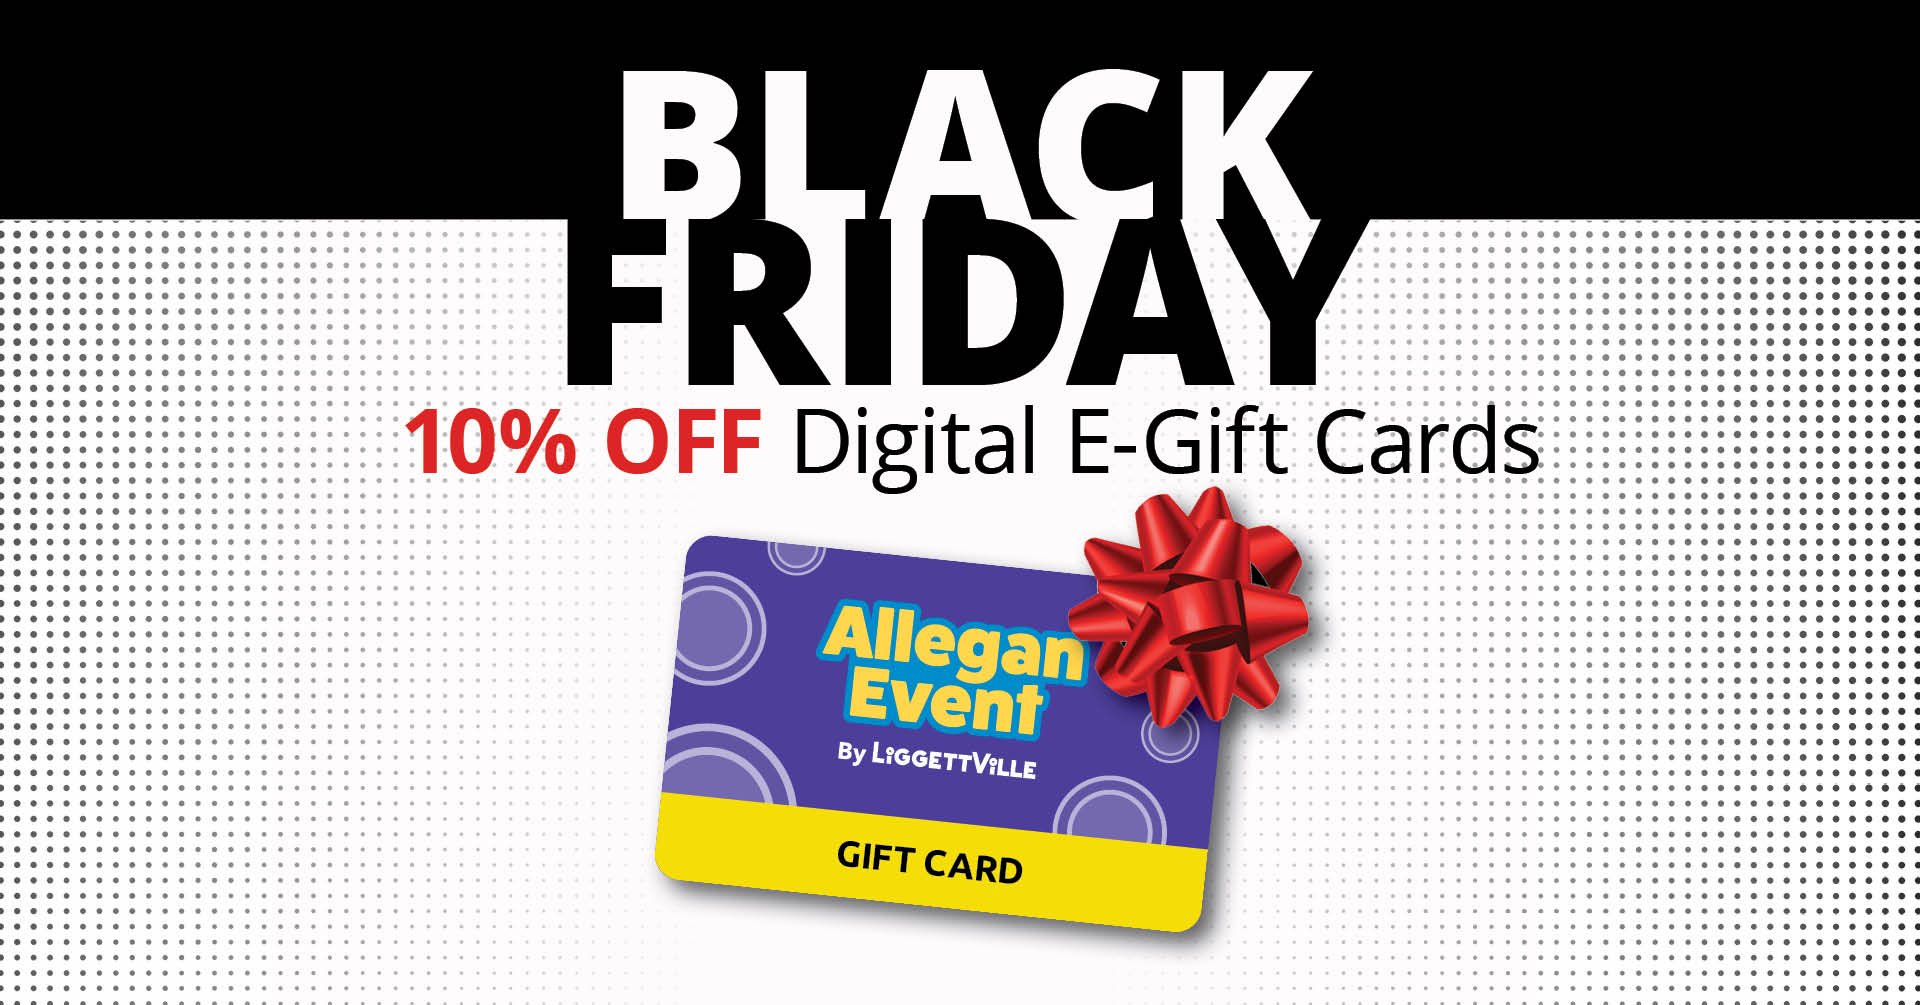 Shop Smart and Save Big with Allegan Event's Exclusive Holiday Promotion! —  Allegan Event